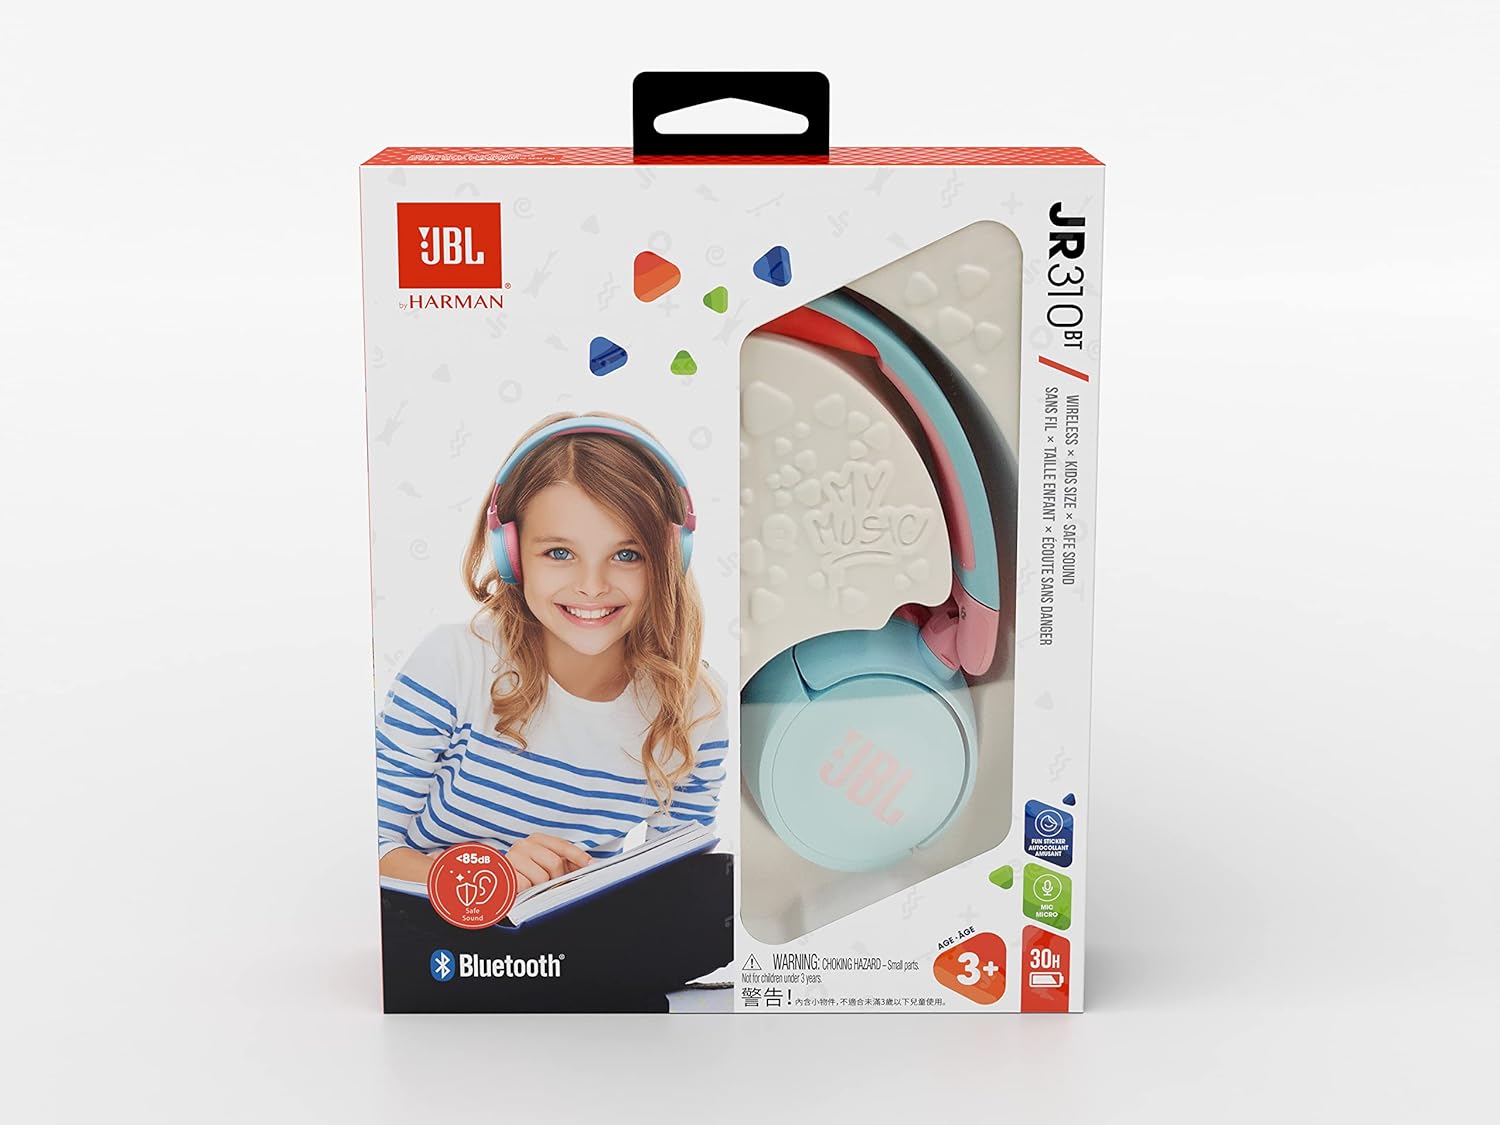 JBL JR310BT Ultra Portable Kids Wireless On-Ear Headphones with Safe Sound, Built-In Mic, 30 Hours Battery, Soft Padded Headband and Ear Cushion